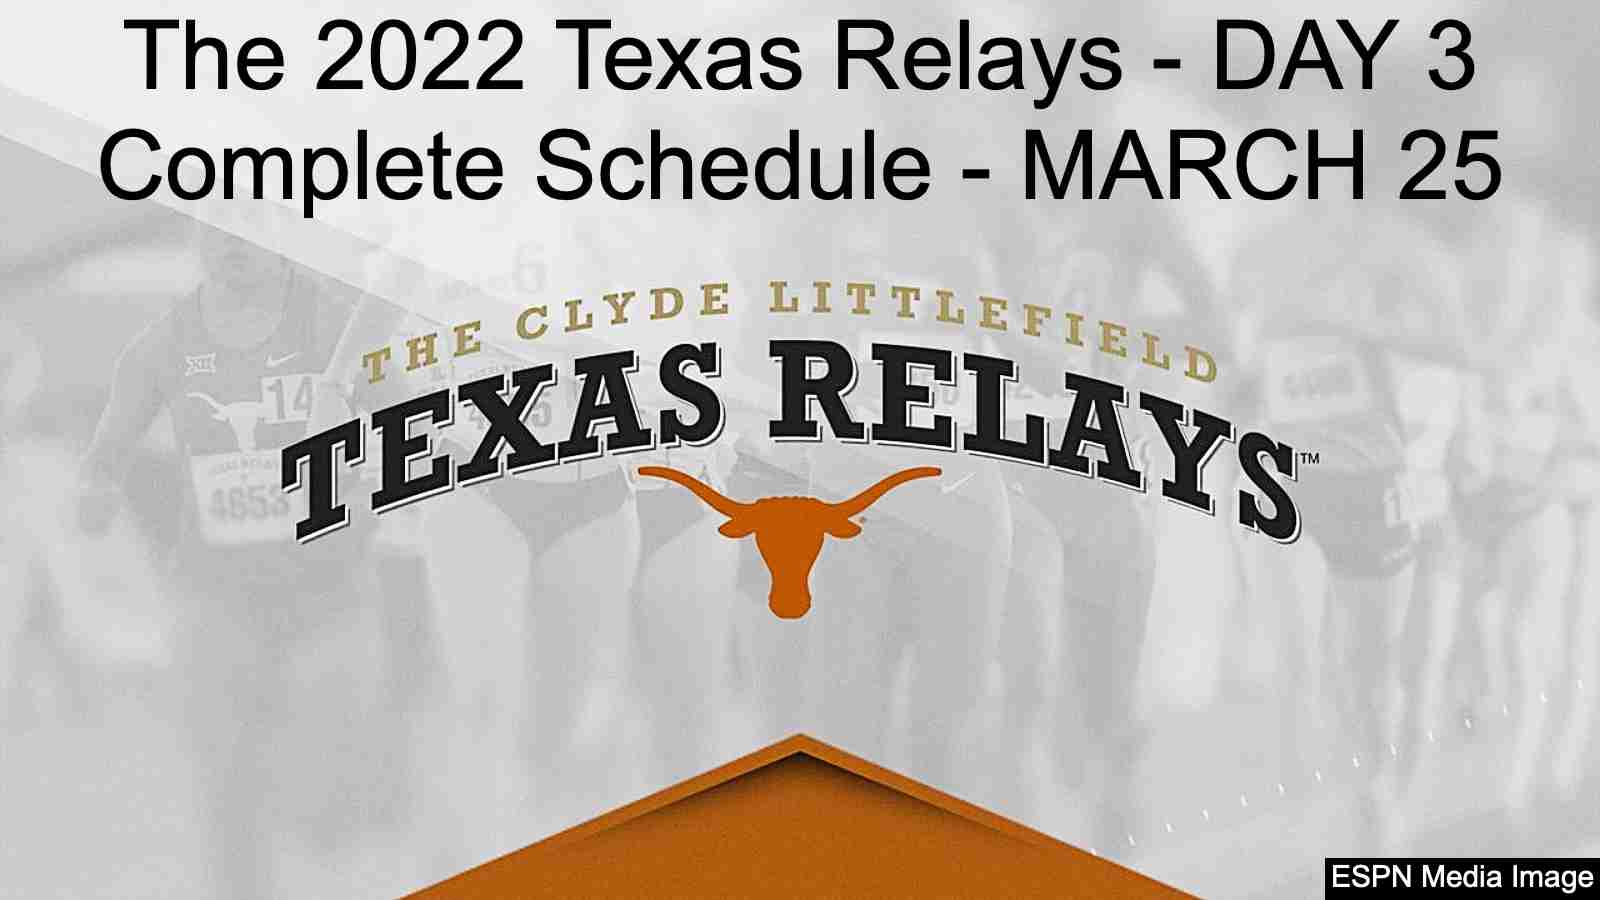 Day 3 of Texas Relays 2022 – order of events schedule